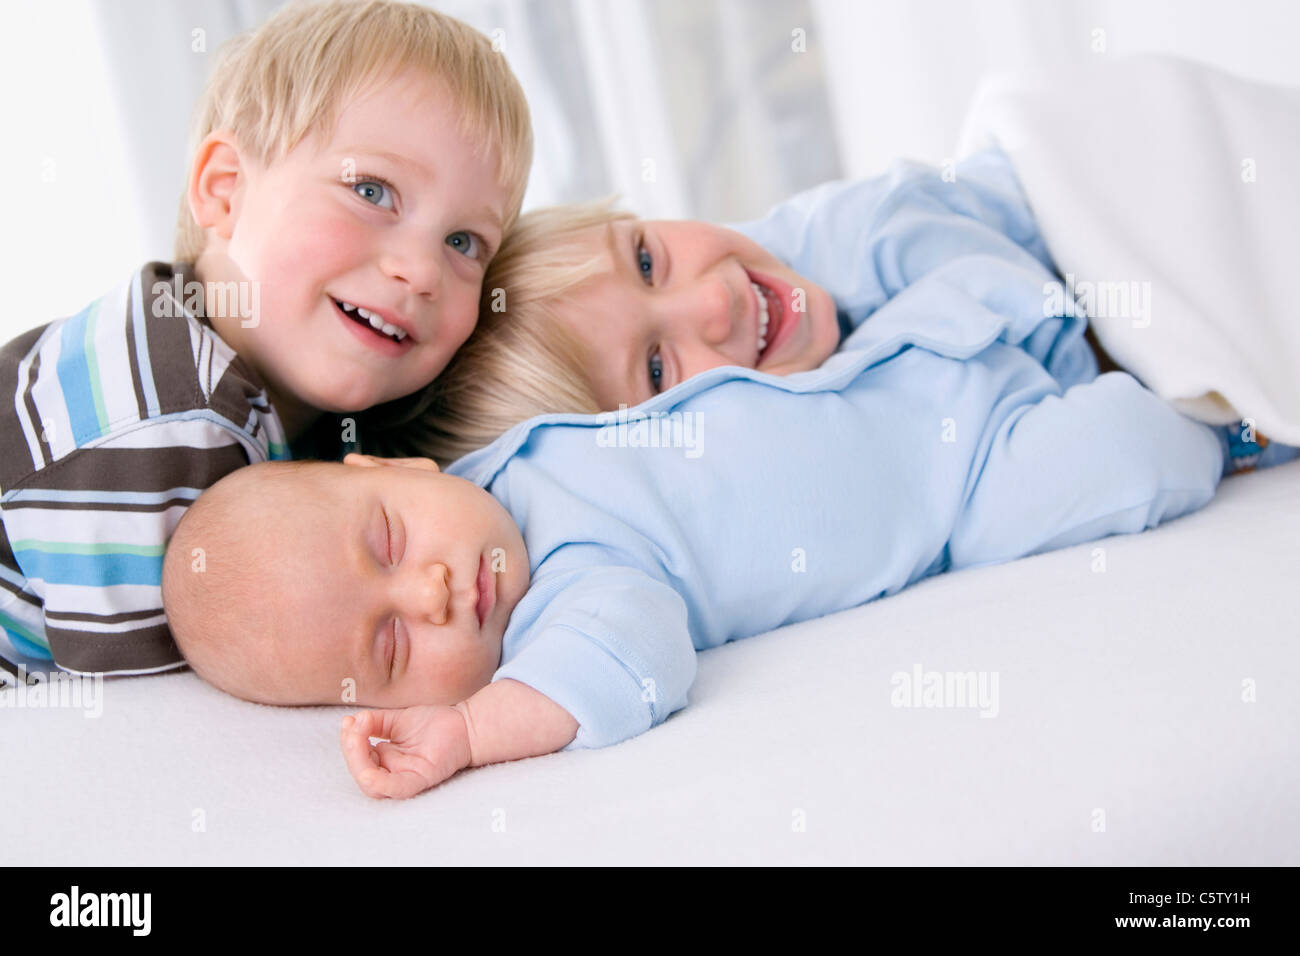 Baby girl (2 months), boy (2-3 years) and boy (4-5 years), portrait Stock Photo